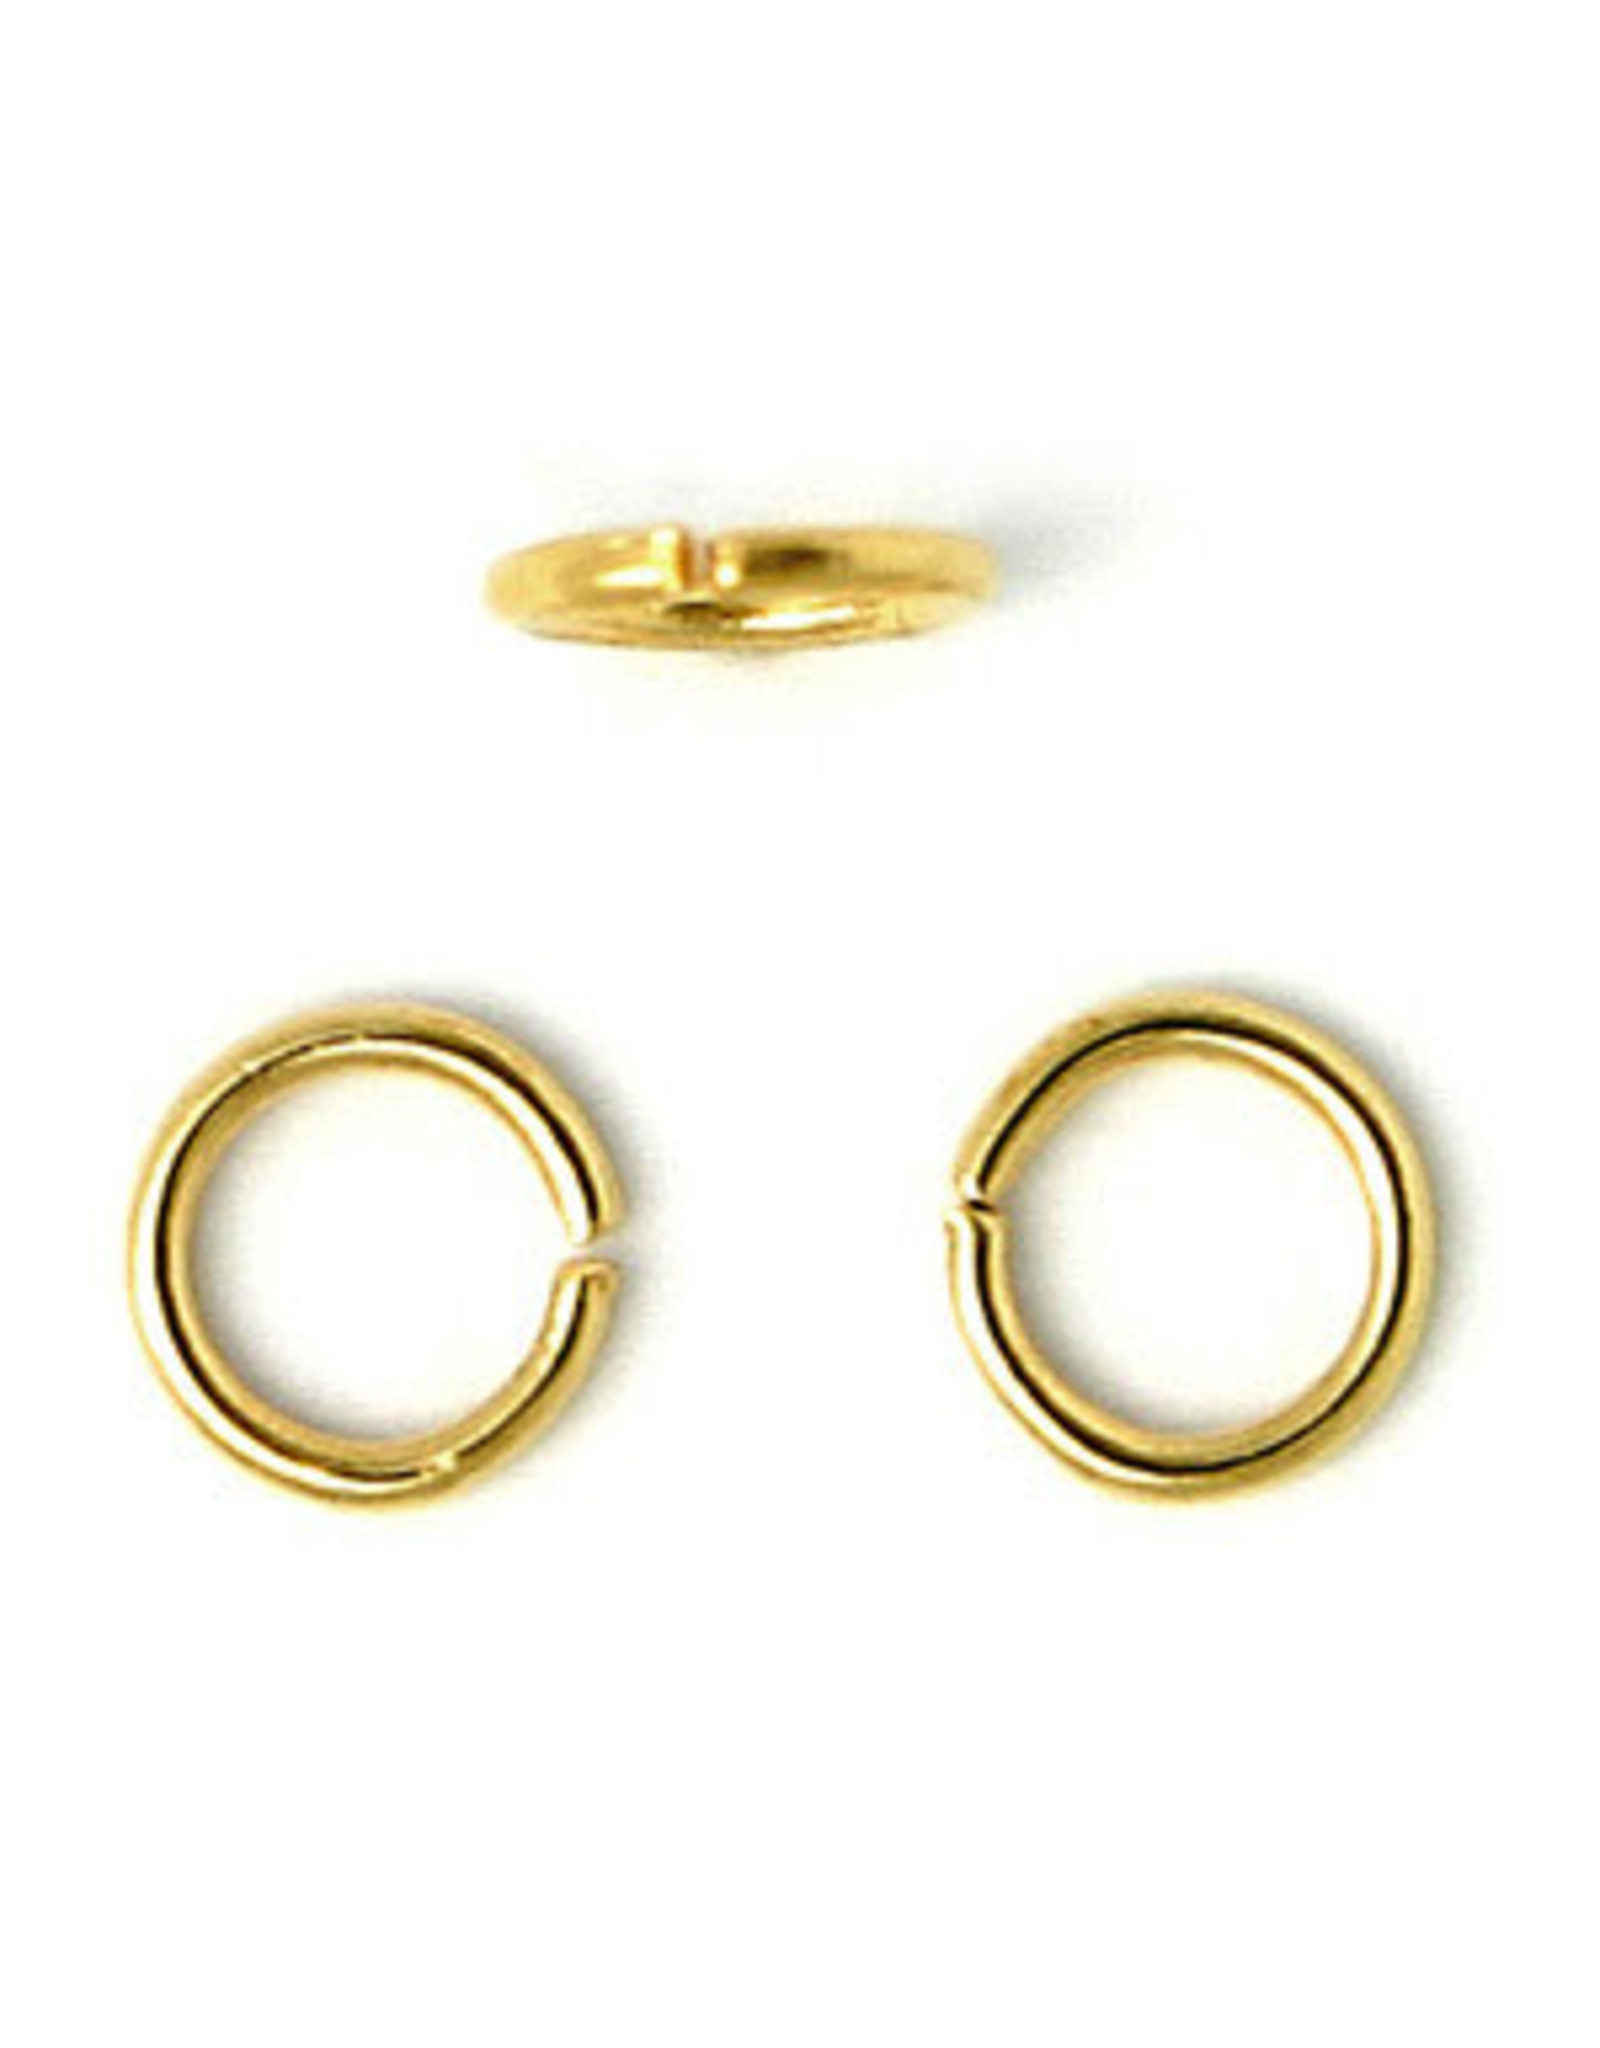 Jump Ring 5mm Gold approx 21g  x100 NF